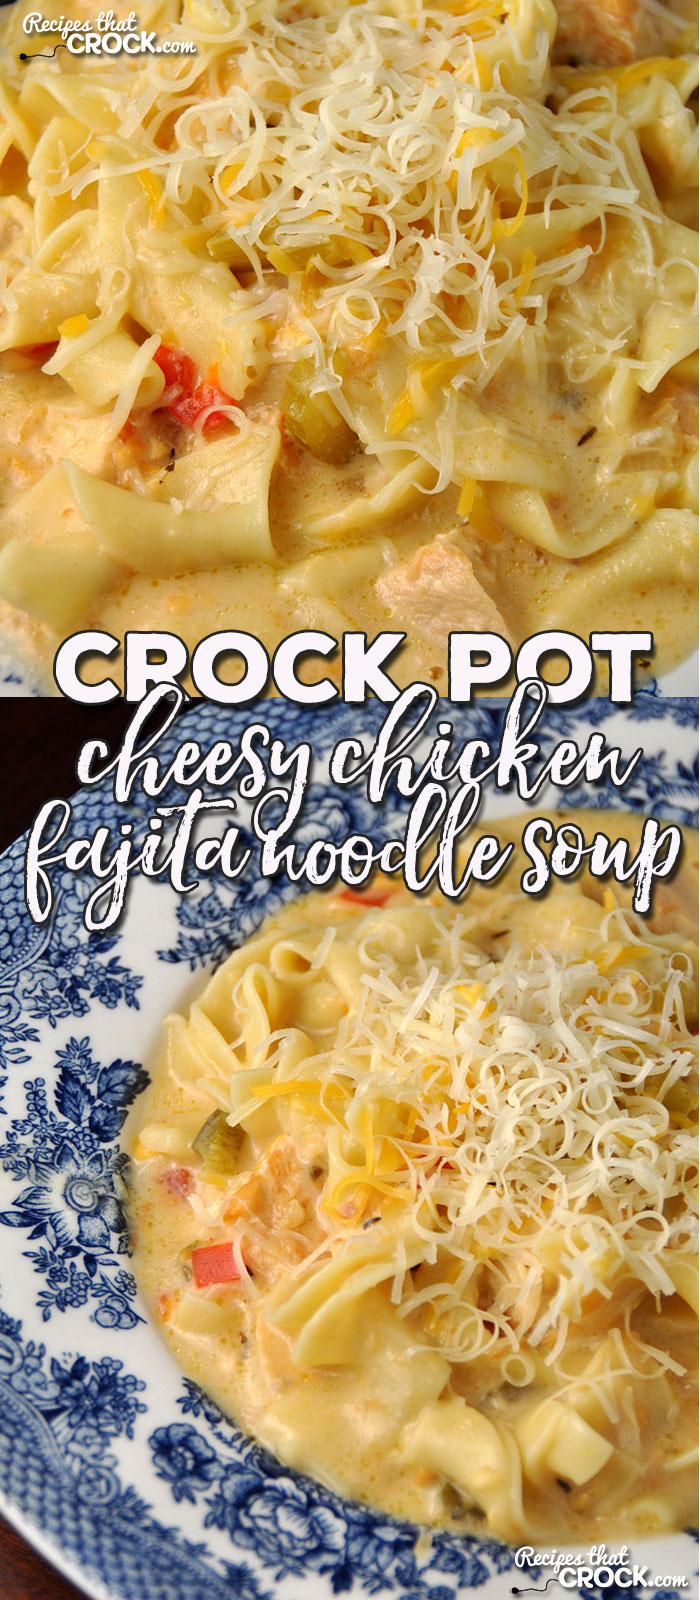 This Crock Pot Cheesy Chicken Fajita Noodle Soup is super easy to make and has a fabulous flavor that will have young and old alike singing it's praises!